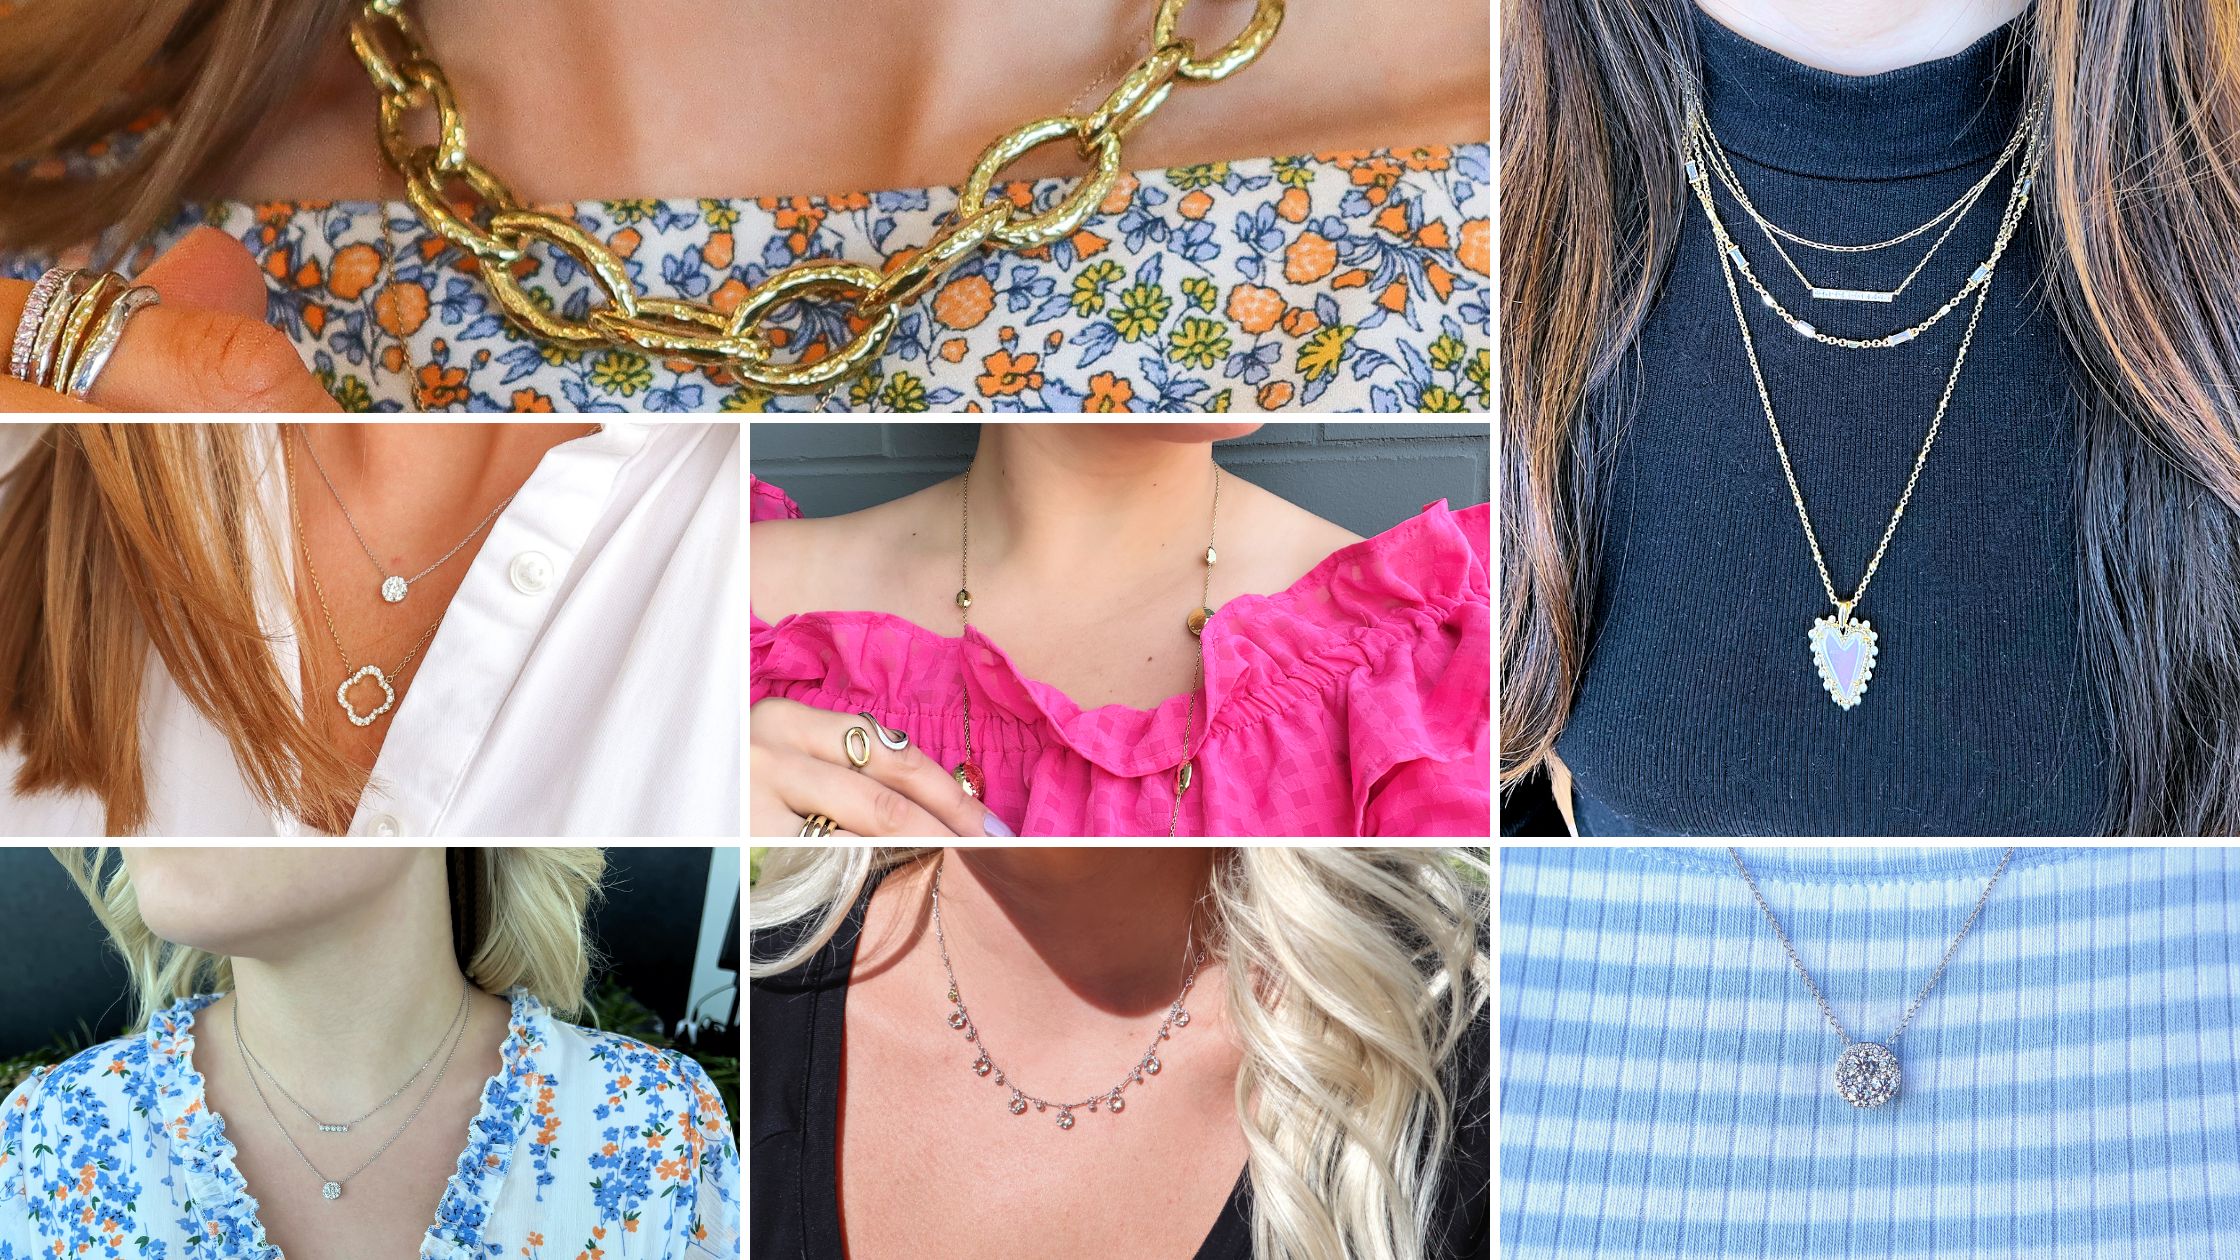 How To Choose The Right Necklace For Your Outfit